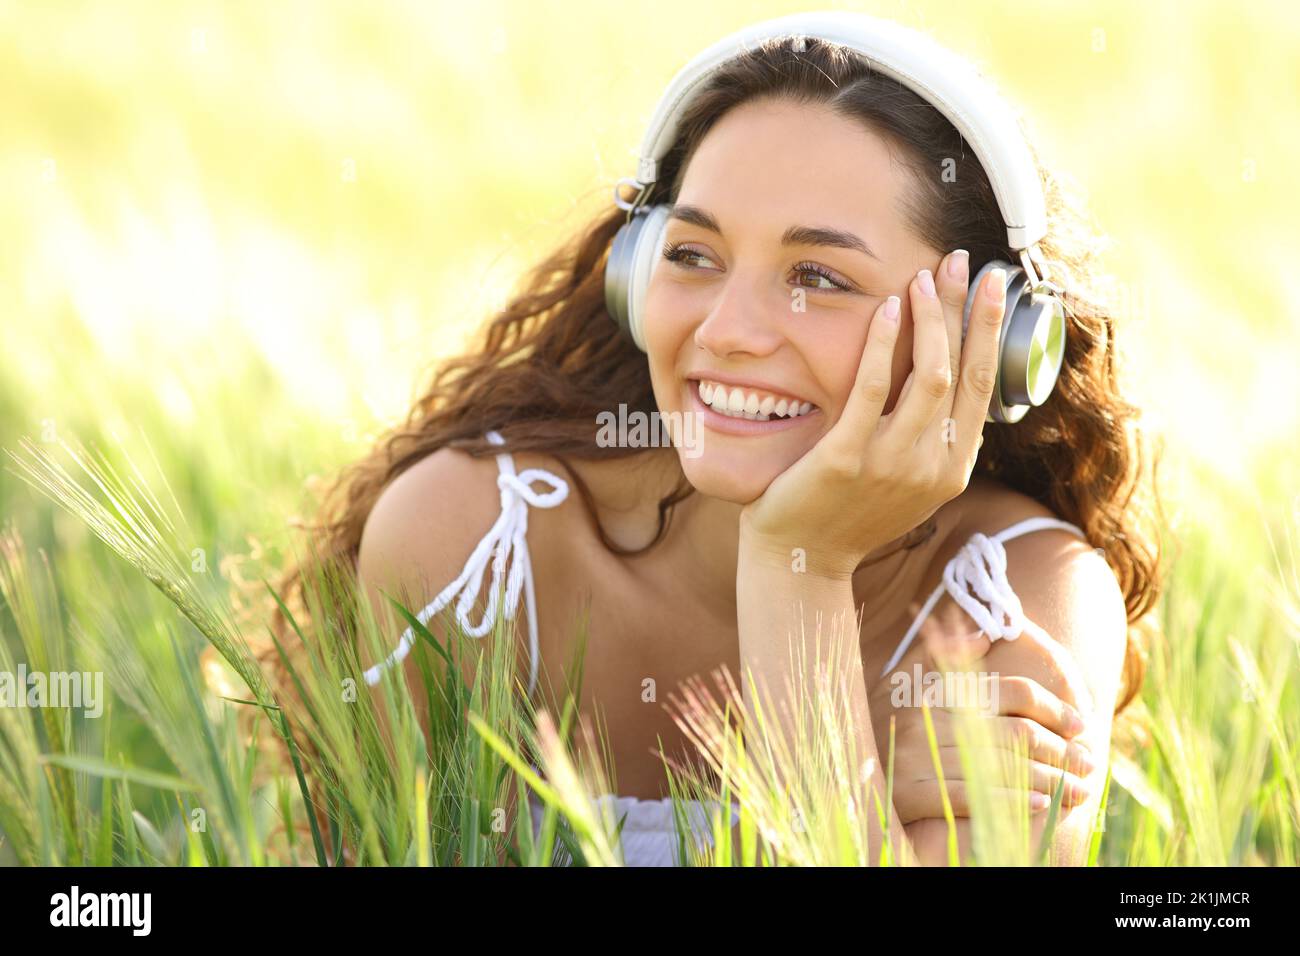 Happy woman wearing headphones laughing listening to music in a field Stock Photo